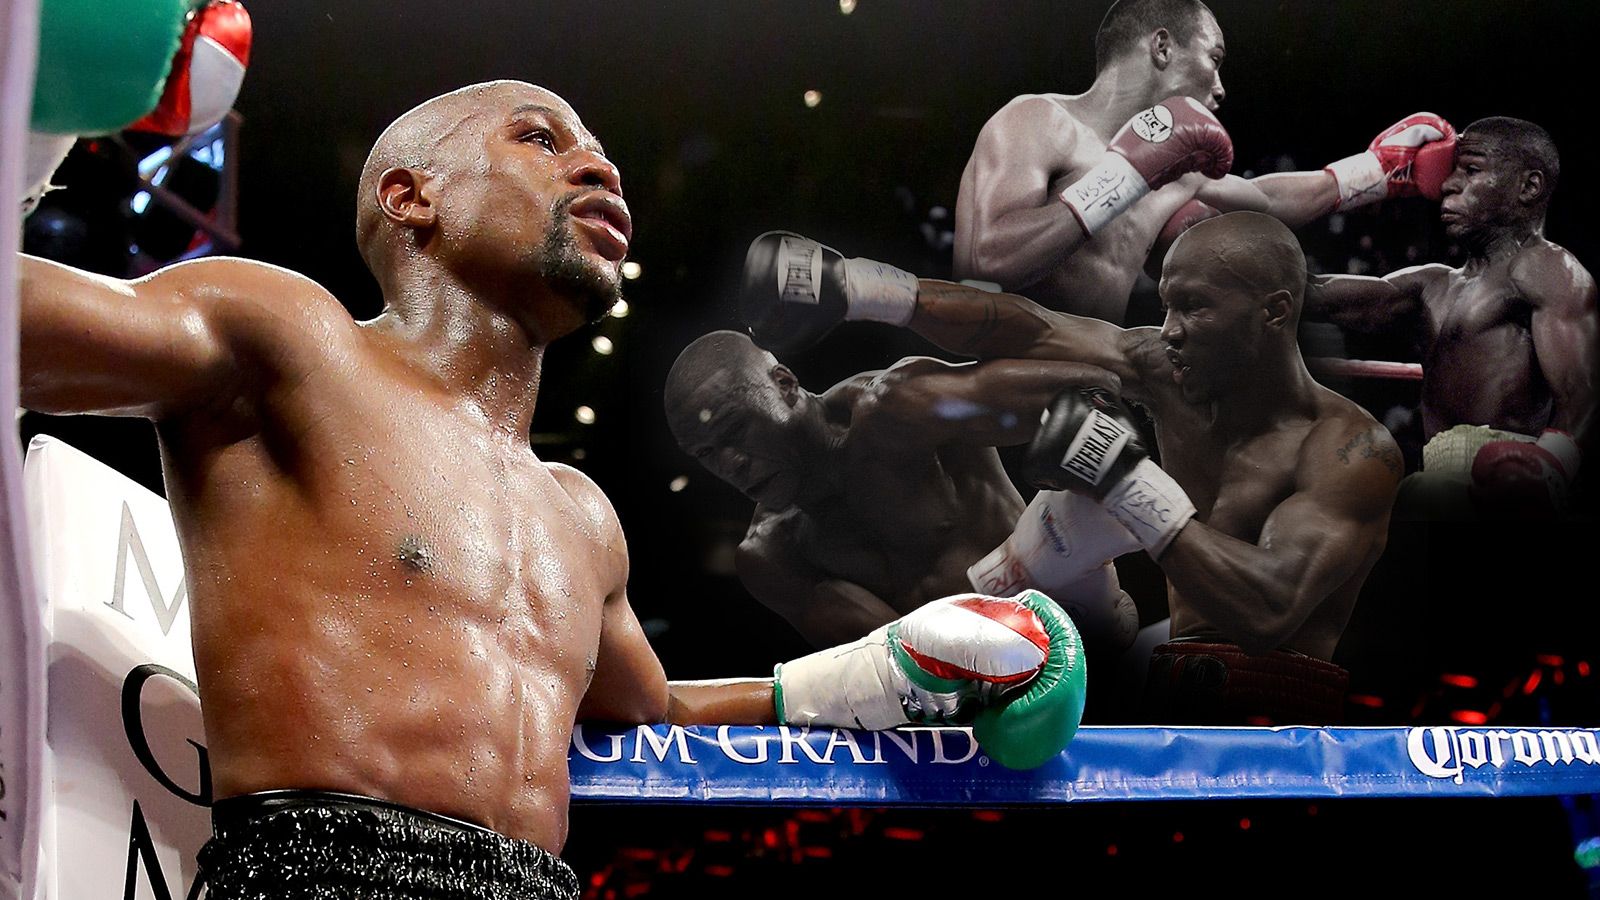 Floyd Mayweather retired with unbeaten boxing record but win over Jose Luis  Castillo was controversial - even the TV judge thought he lost